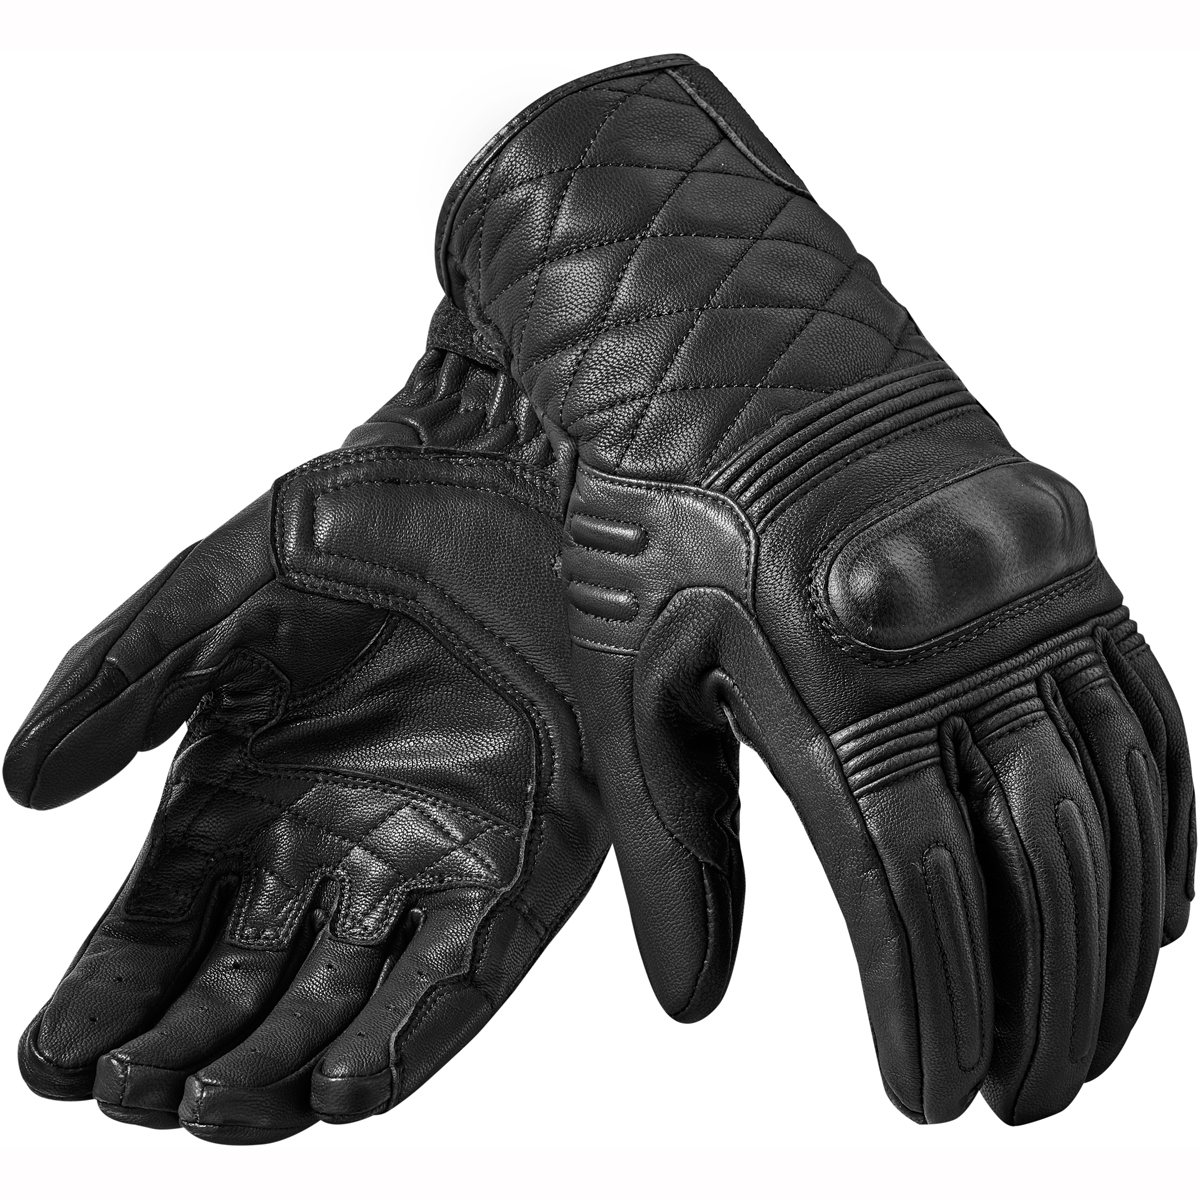 Top 10 summer gloves in association with GetGeared